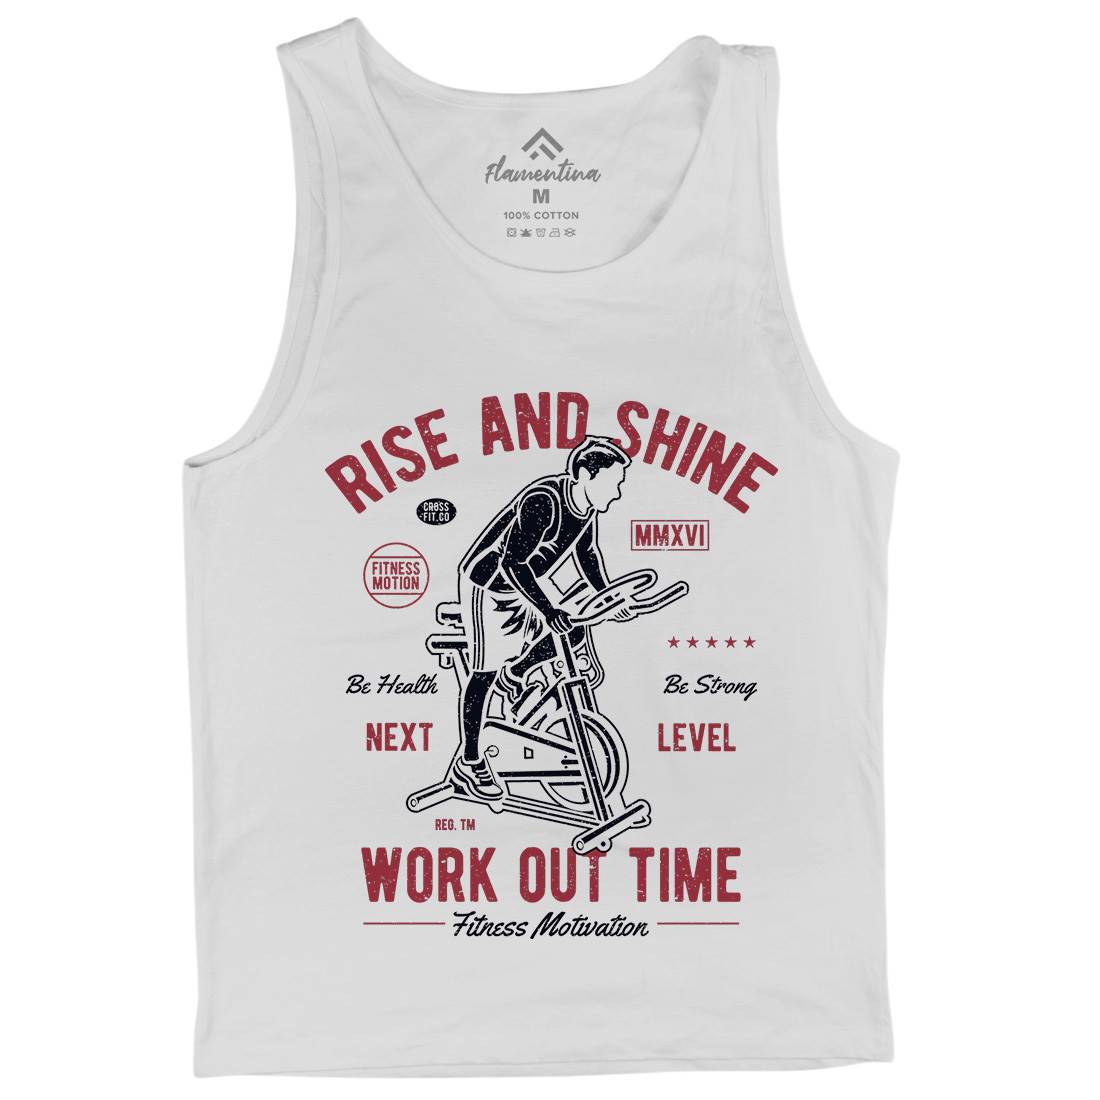 Work Out Time Mens Tank Top Vest Gym A199